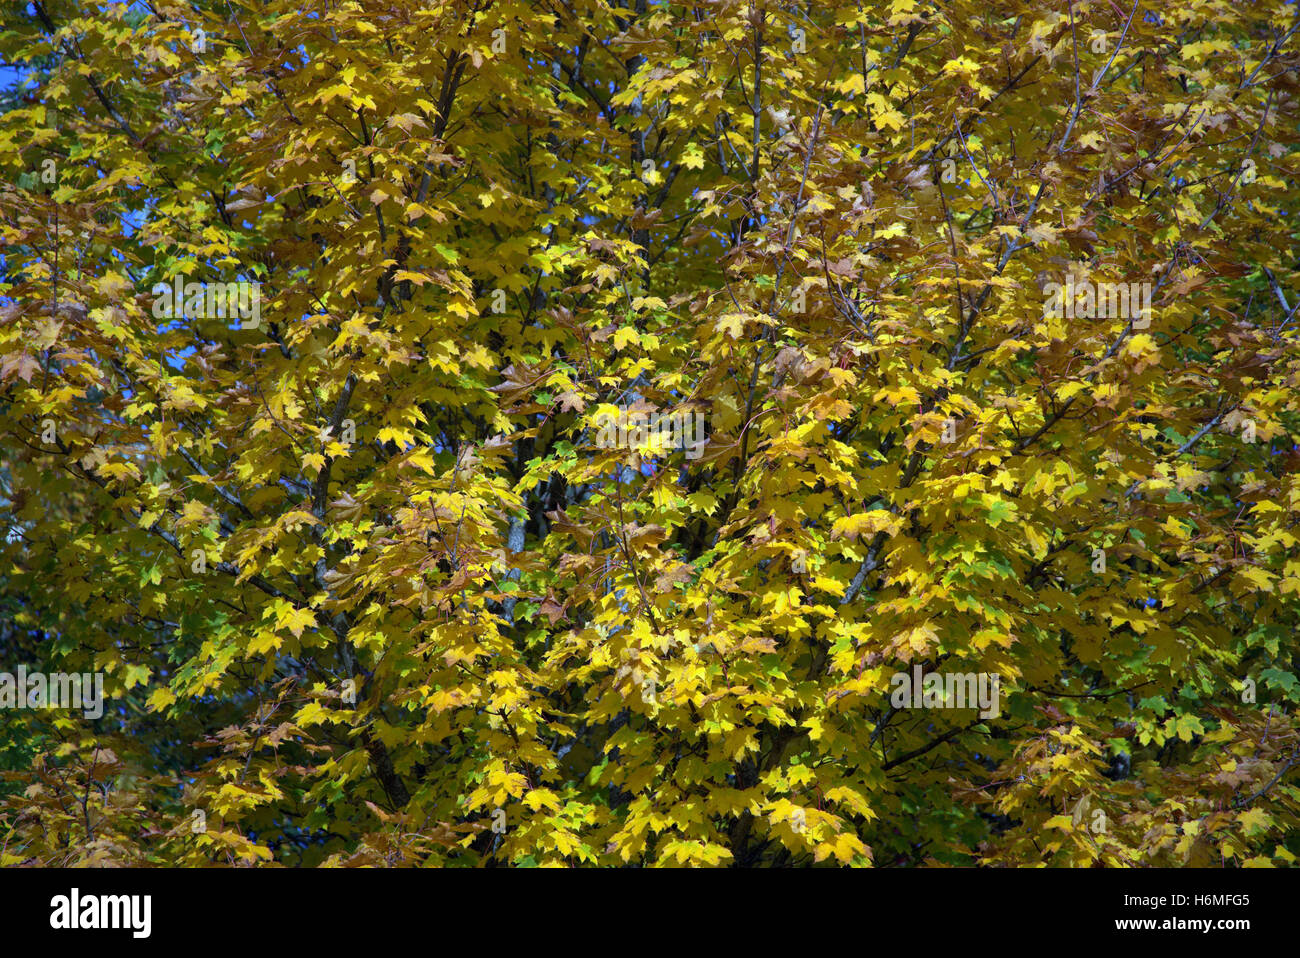 Autumn foliage trees golden leaves patterns and color Stock Photo